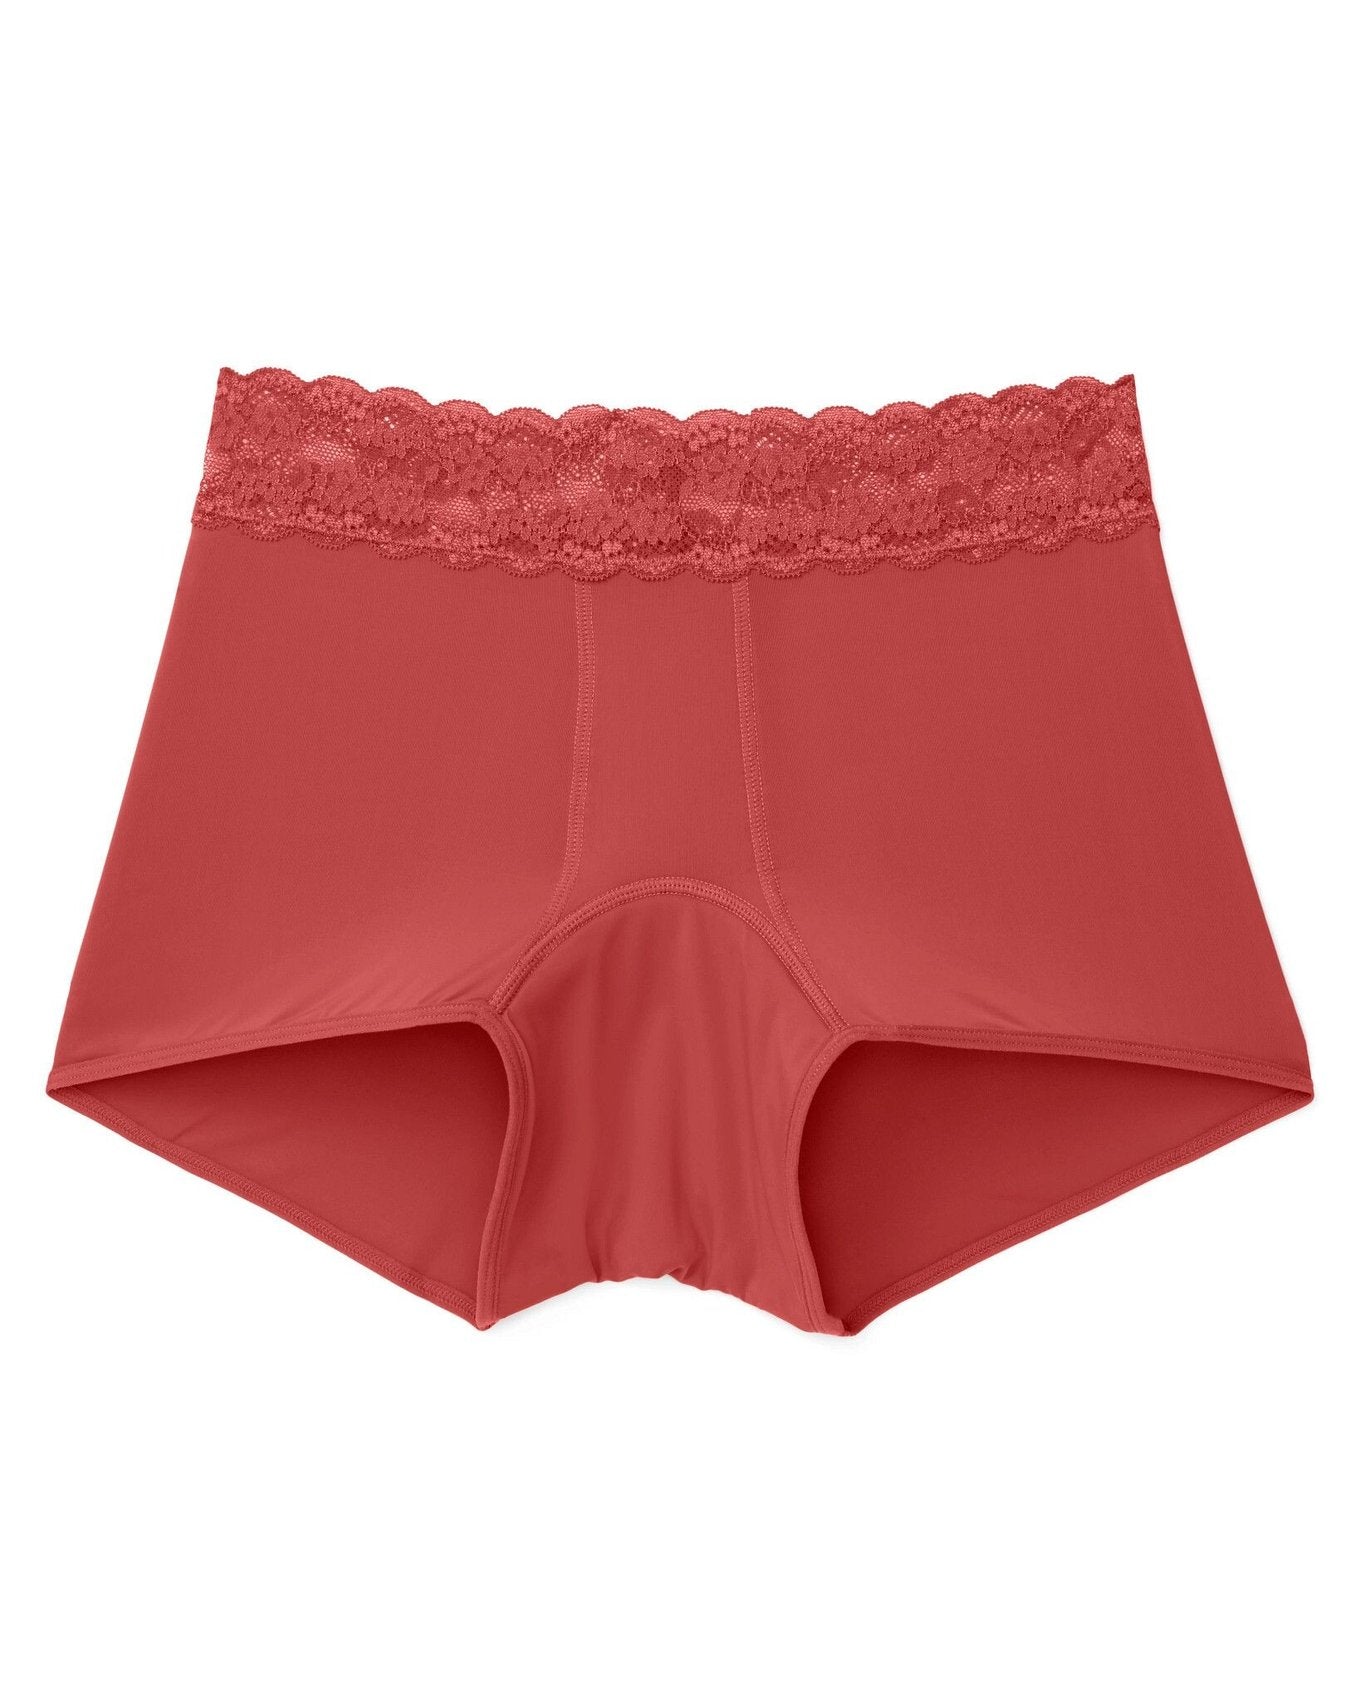 Joyja Emily period-proof panty in color Baked Apple and shape shortie